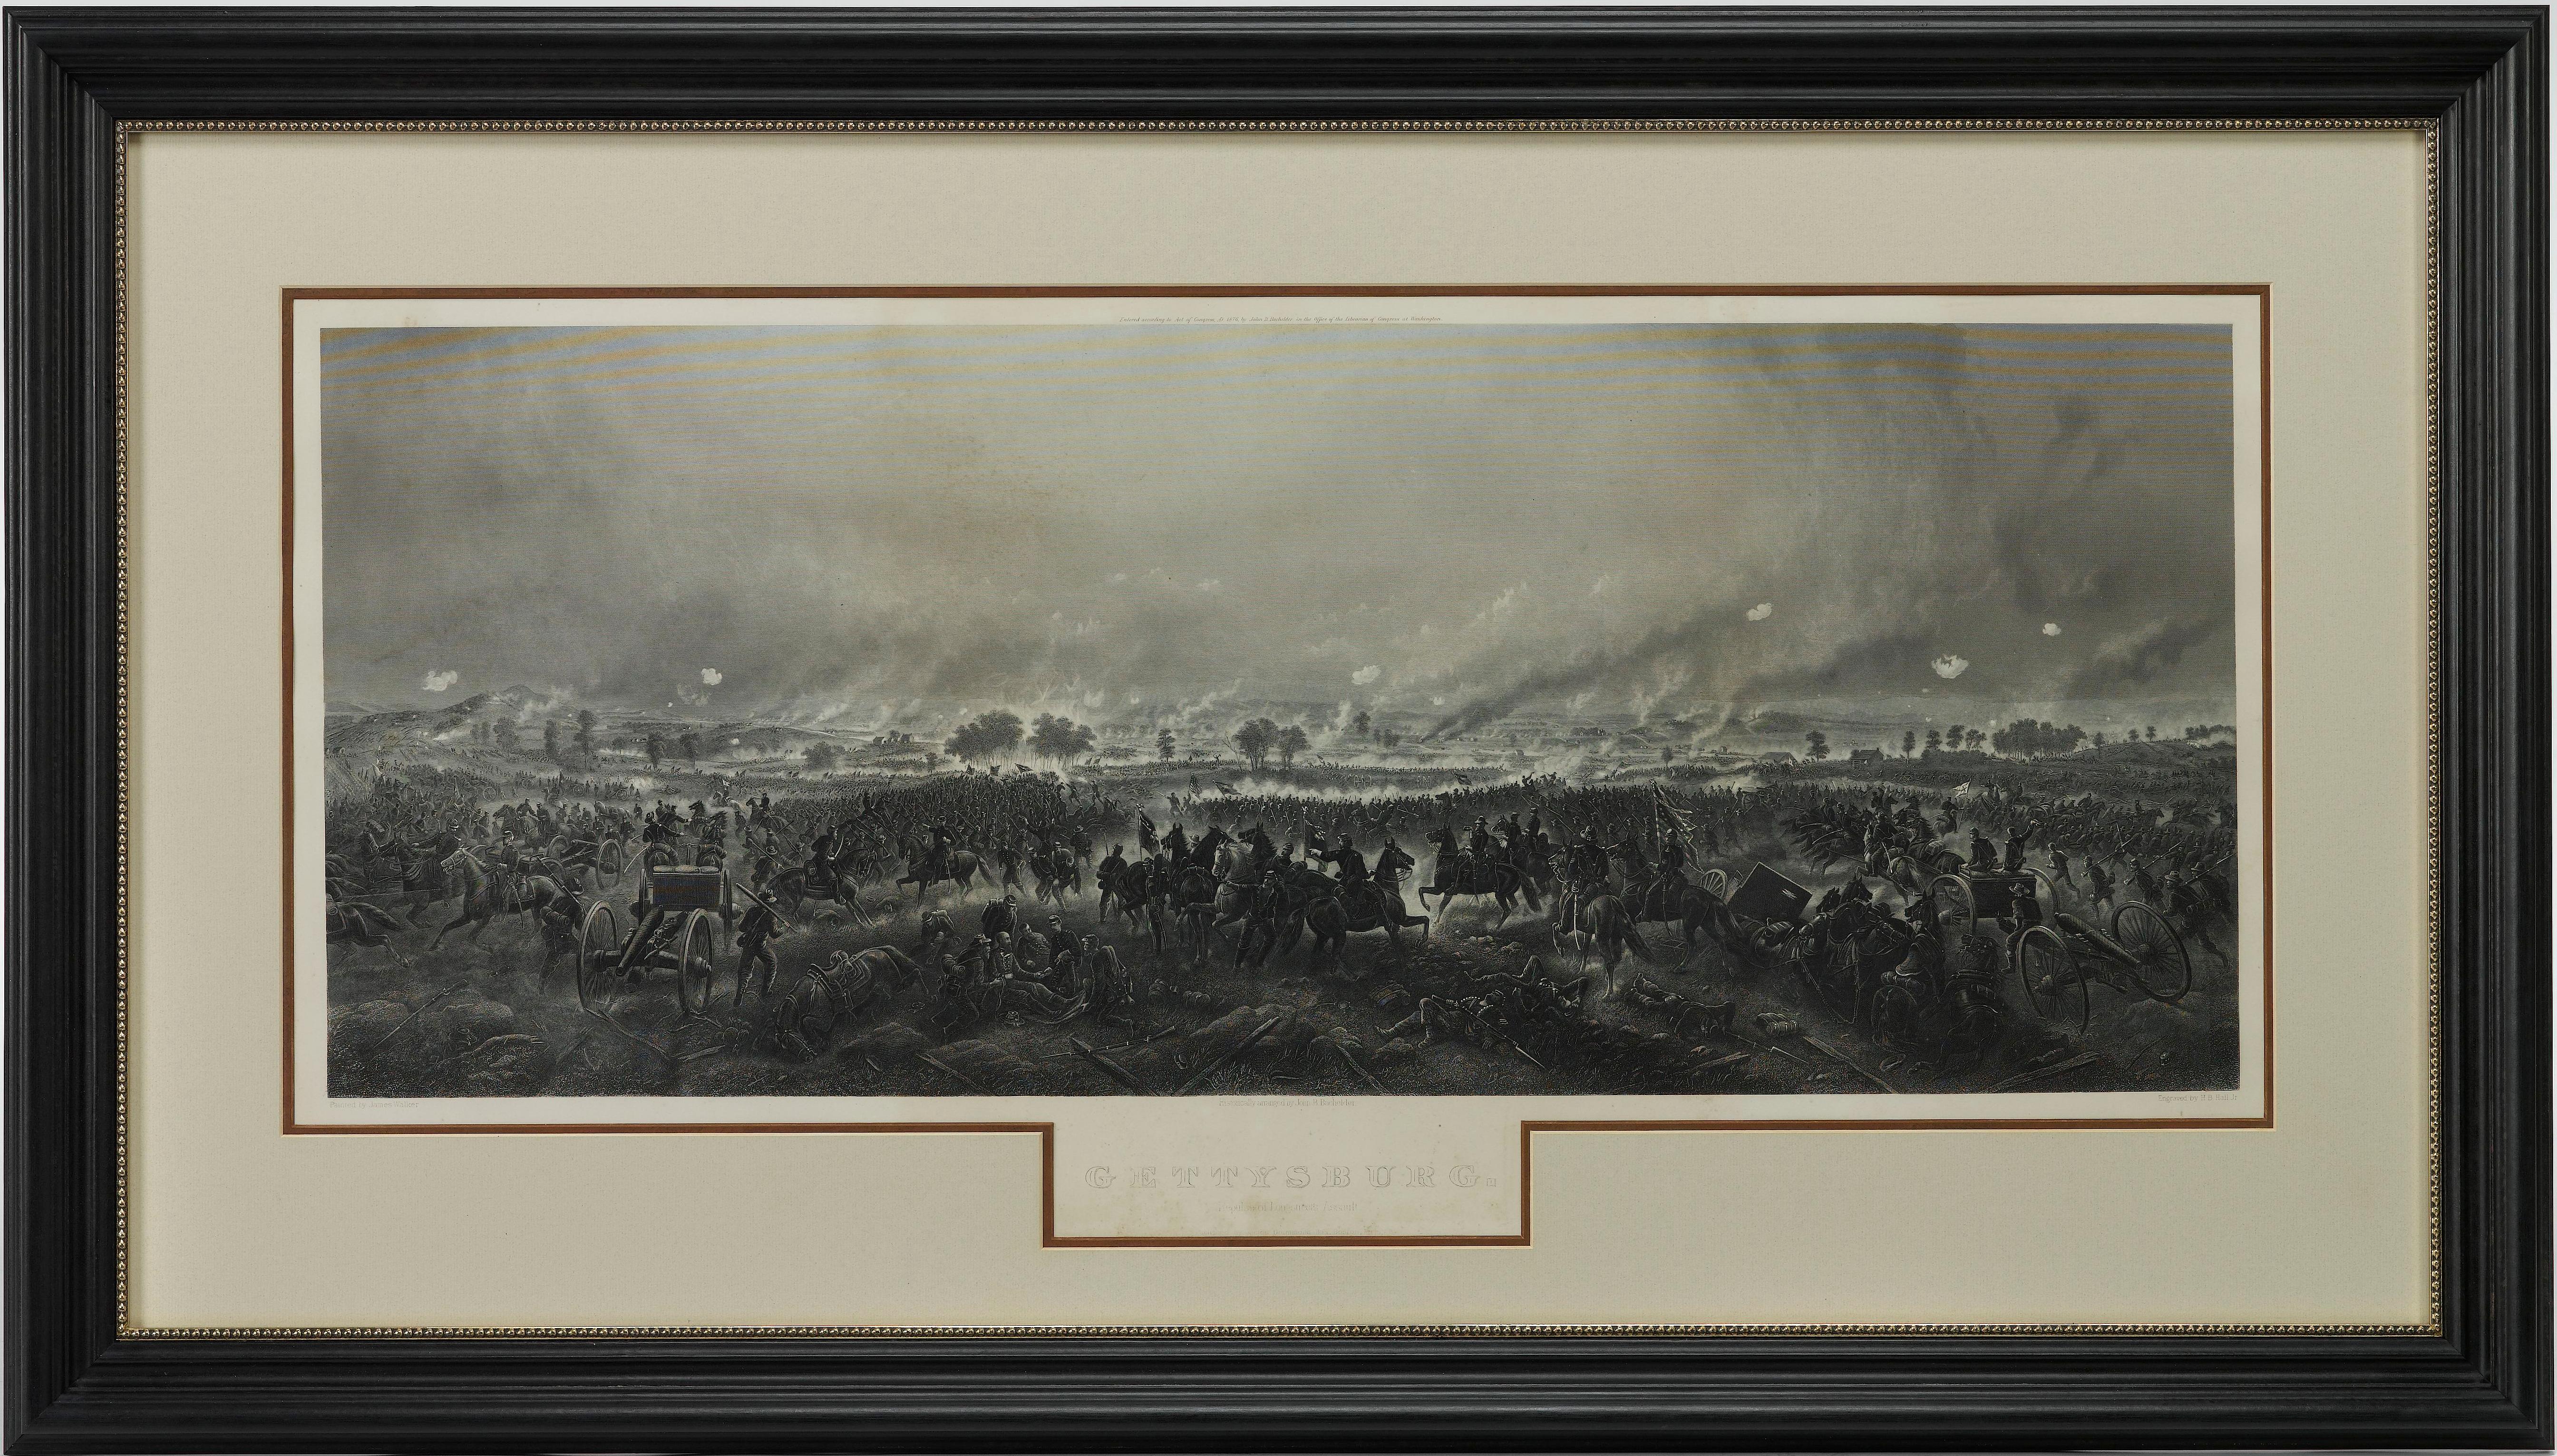 Presented here is an 1876 engraving of John B. Bachelder and James Walker’s Gettysburg. The Repulse of Longstreet’s Assault. The engraved scene depicts the decisive battle on the final day of the Battle of Gettysburg. Researched by the photographer